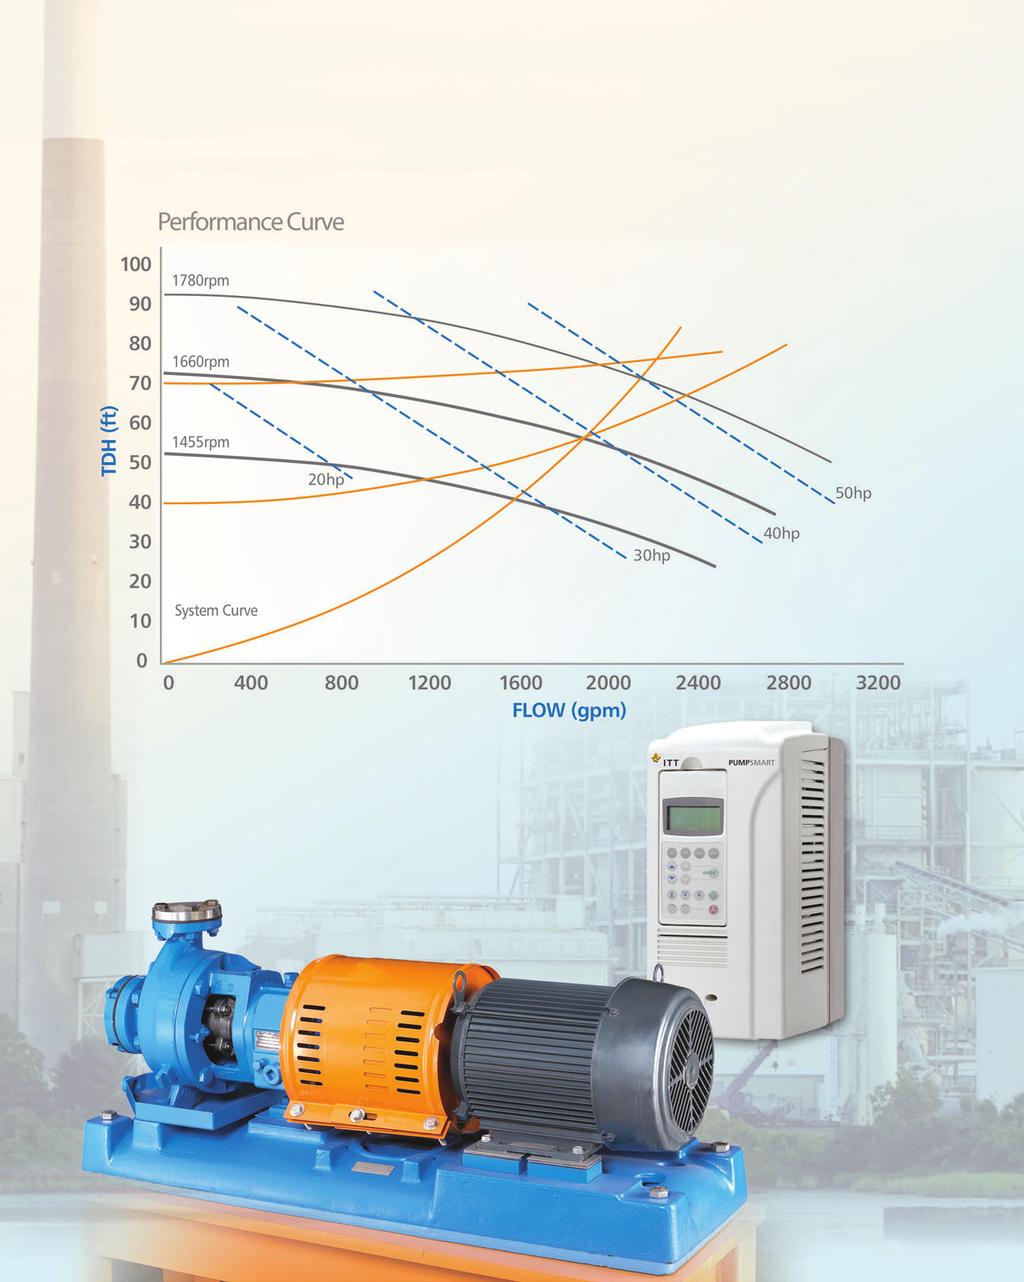 Advanced pump Control, Protection, and Optimization logic designed to prevent failures, improve pump reliability and maximize the Flow Economy of your process systems.